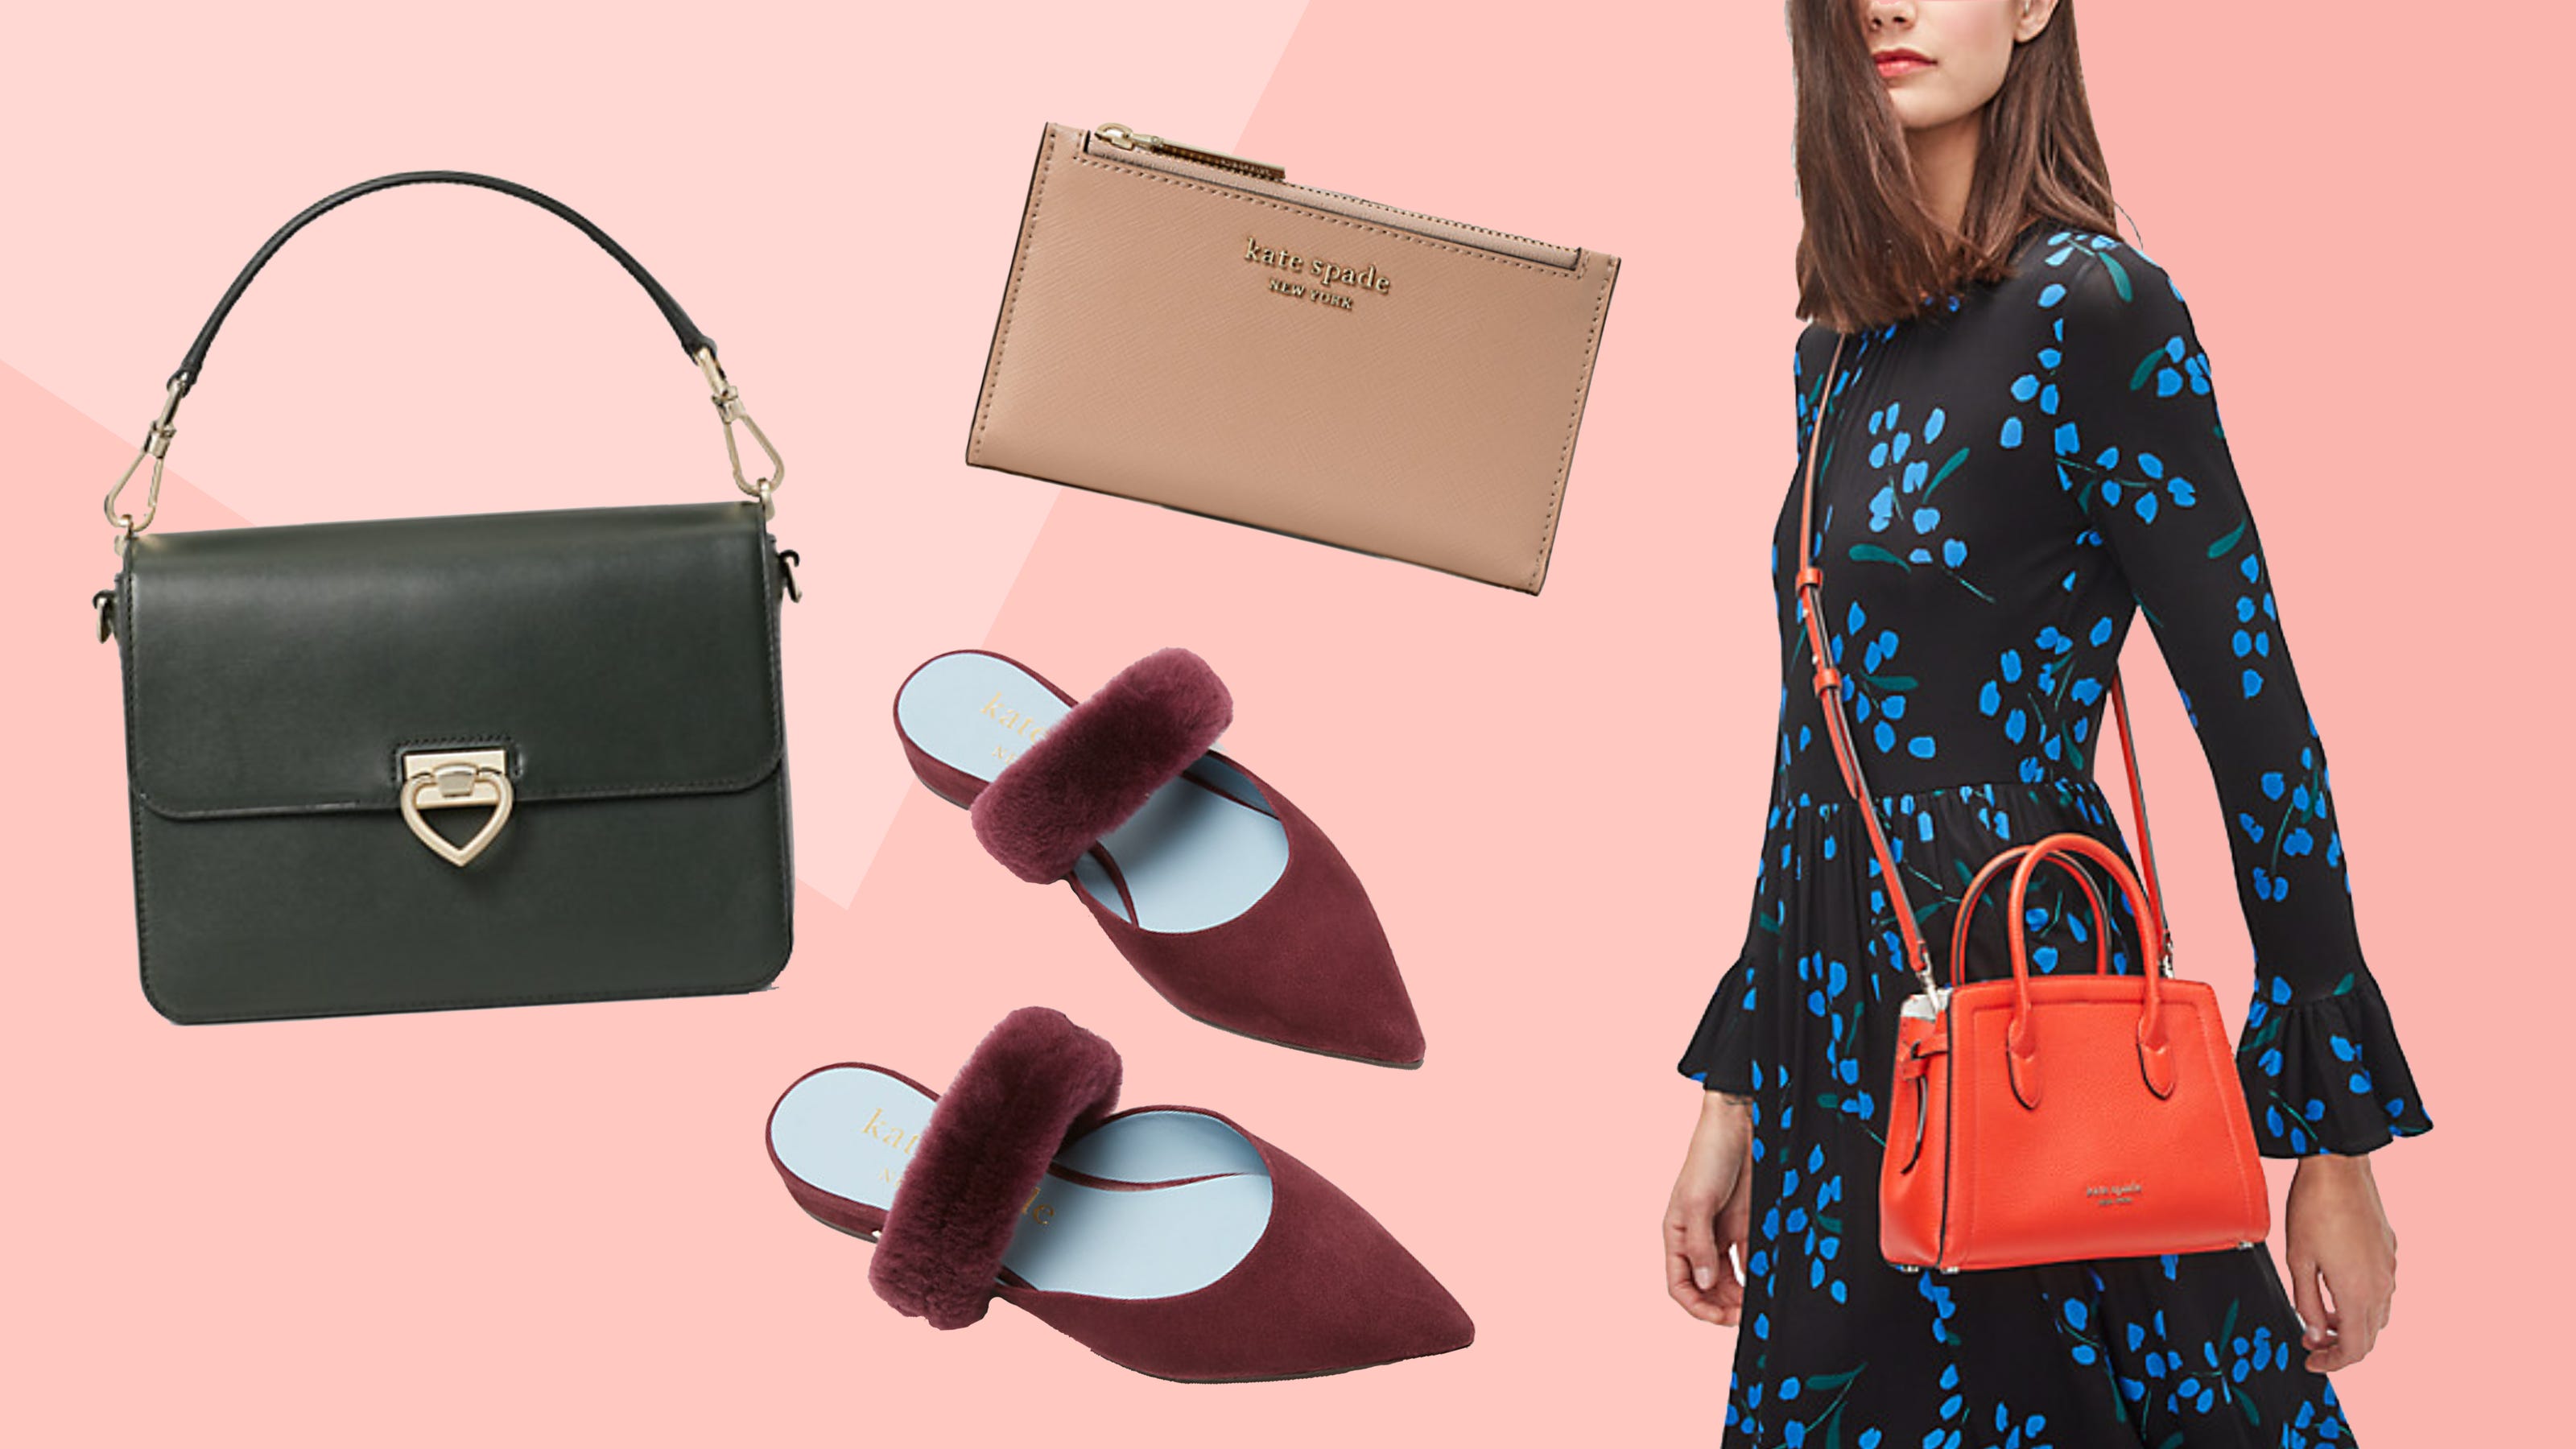 Kate Spade sale: Save an extra 40% on purses, shoes, wallets and more